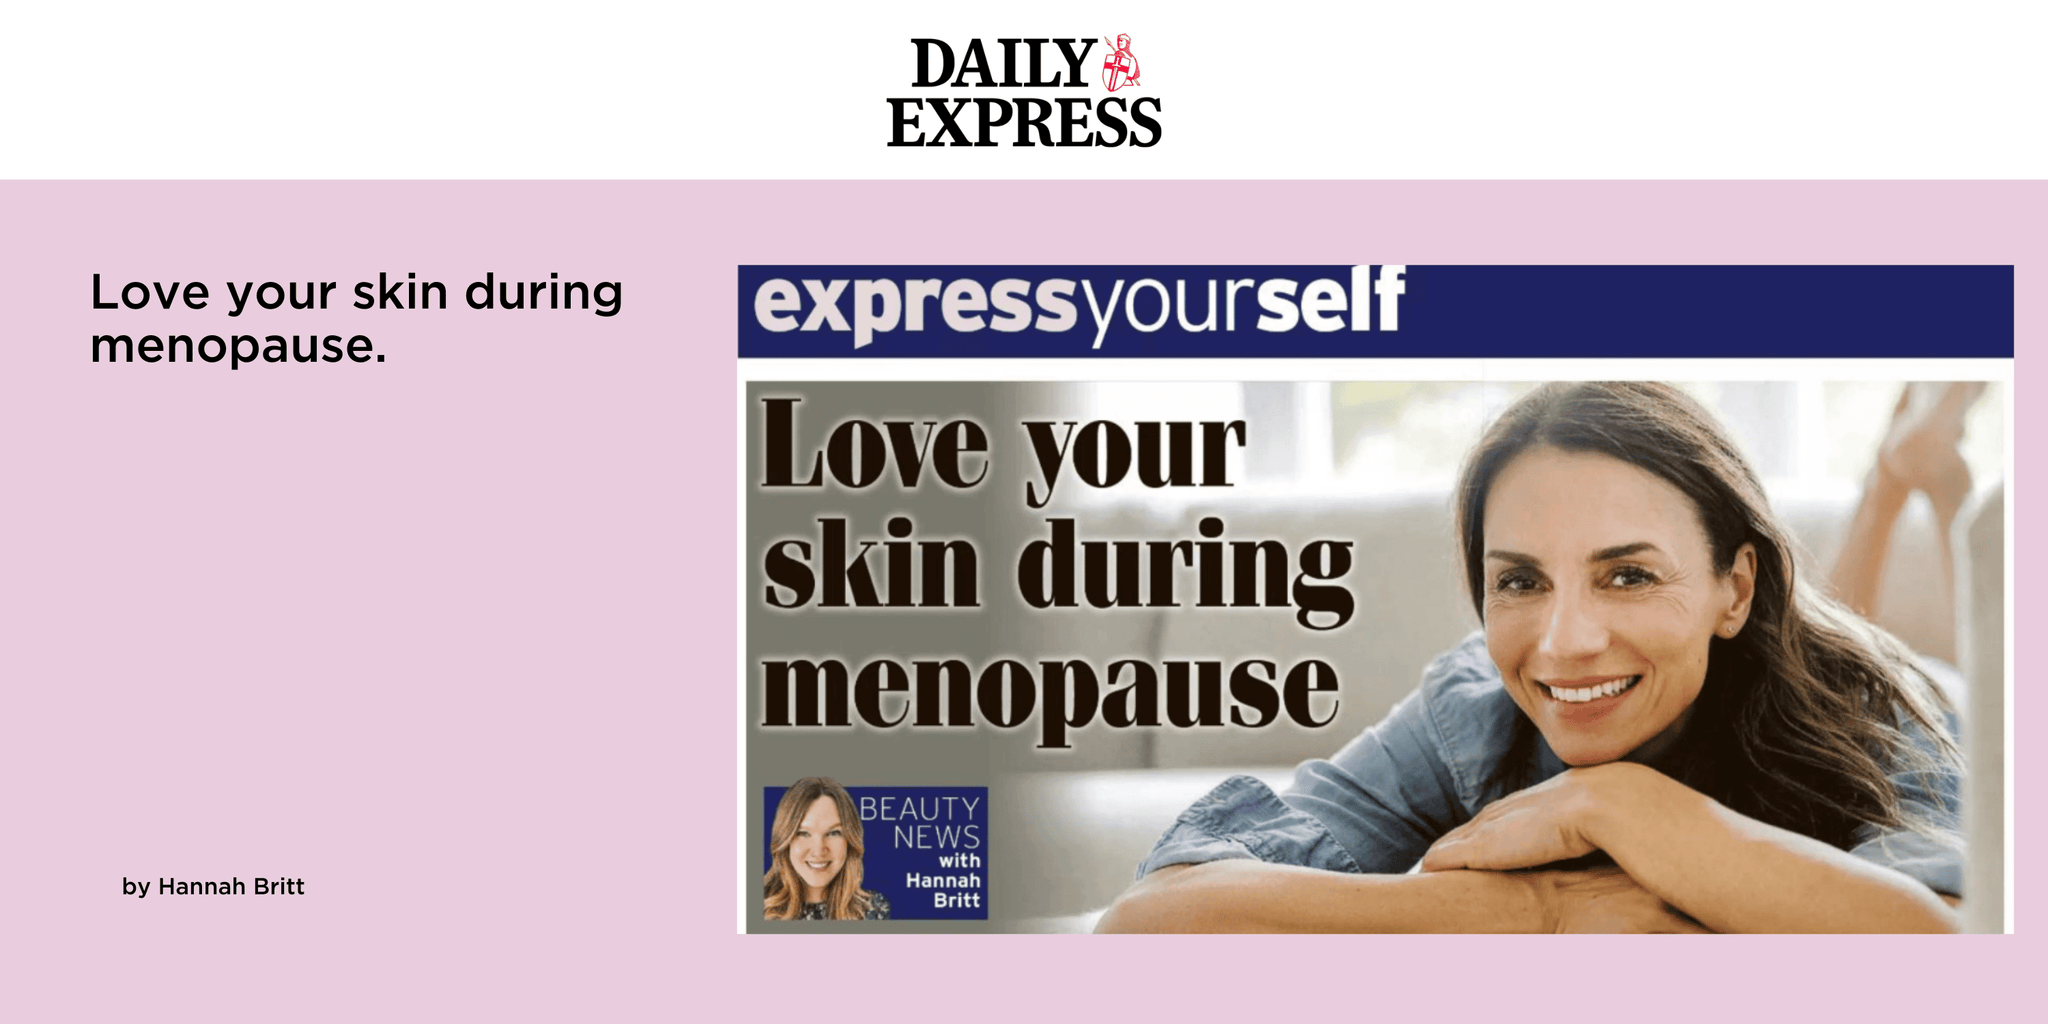 Love your skin during menopause.